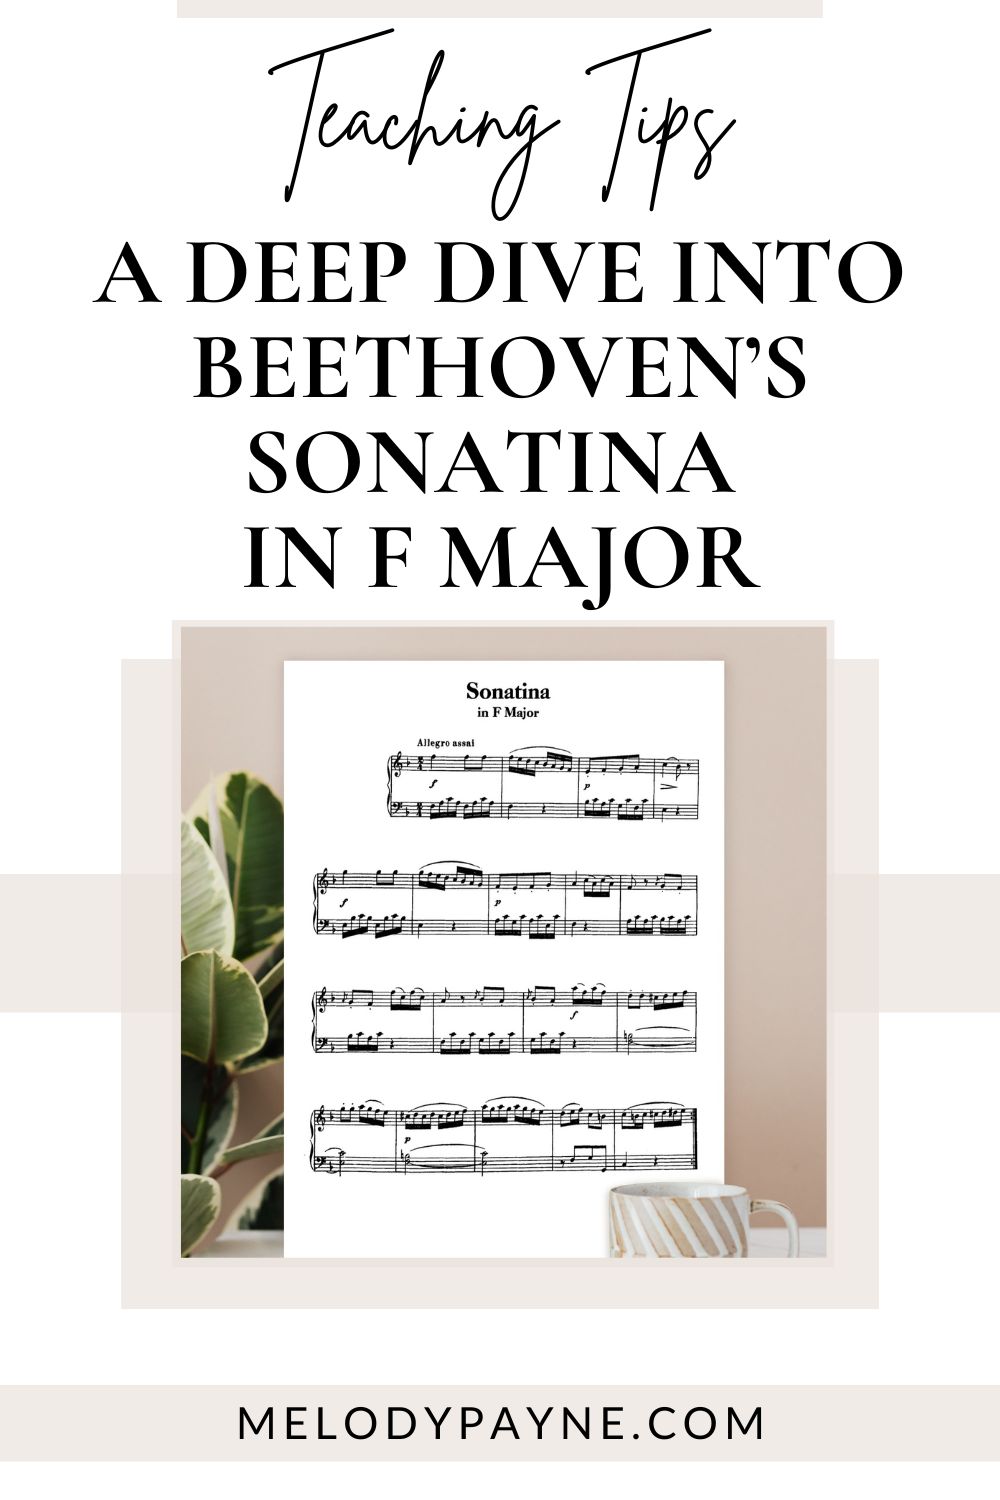 A Deep Dive into Sonatina in F Major by Beethoven